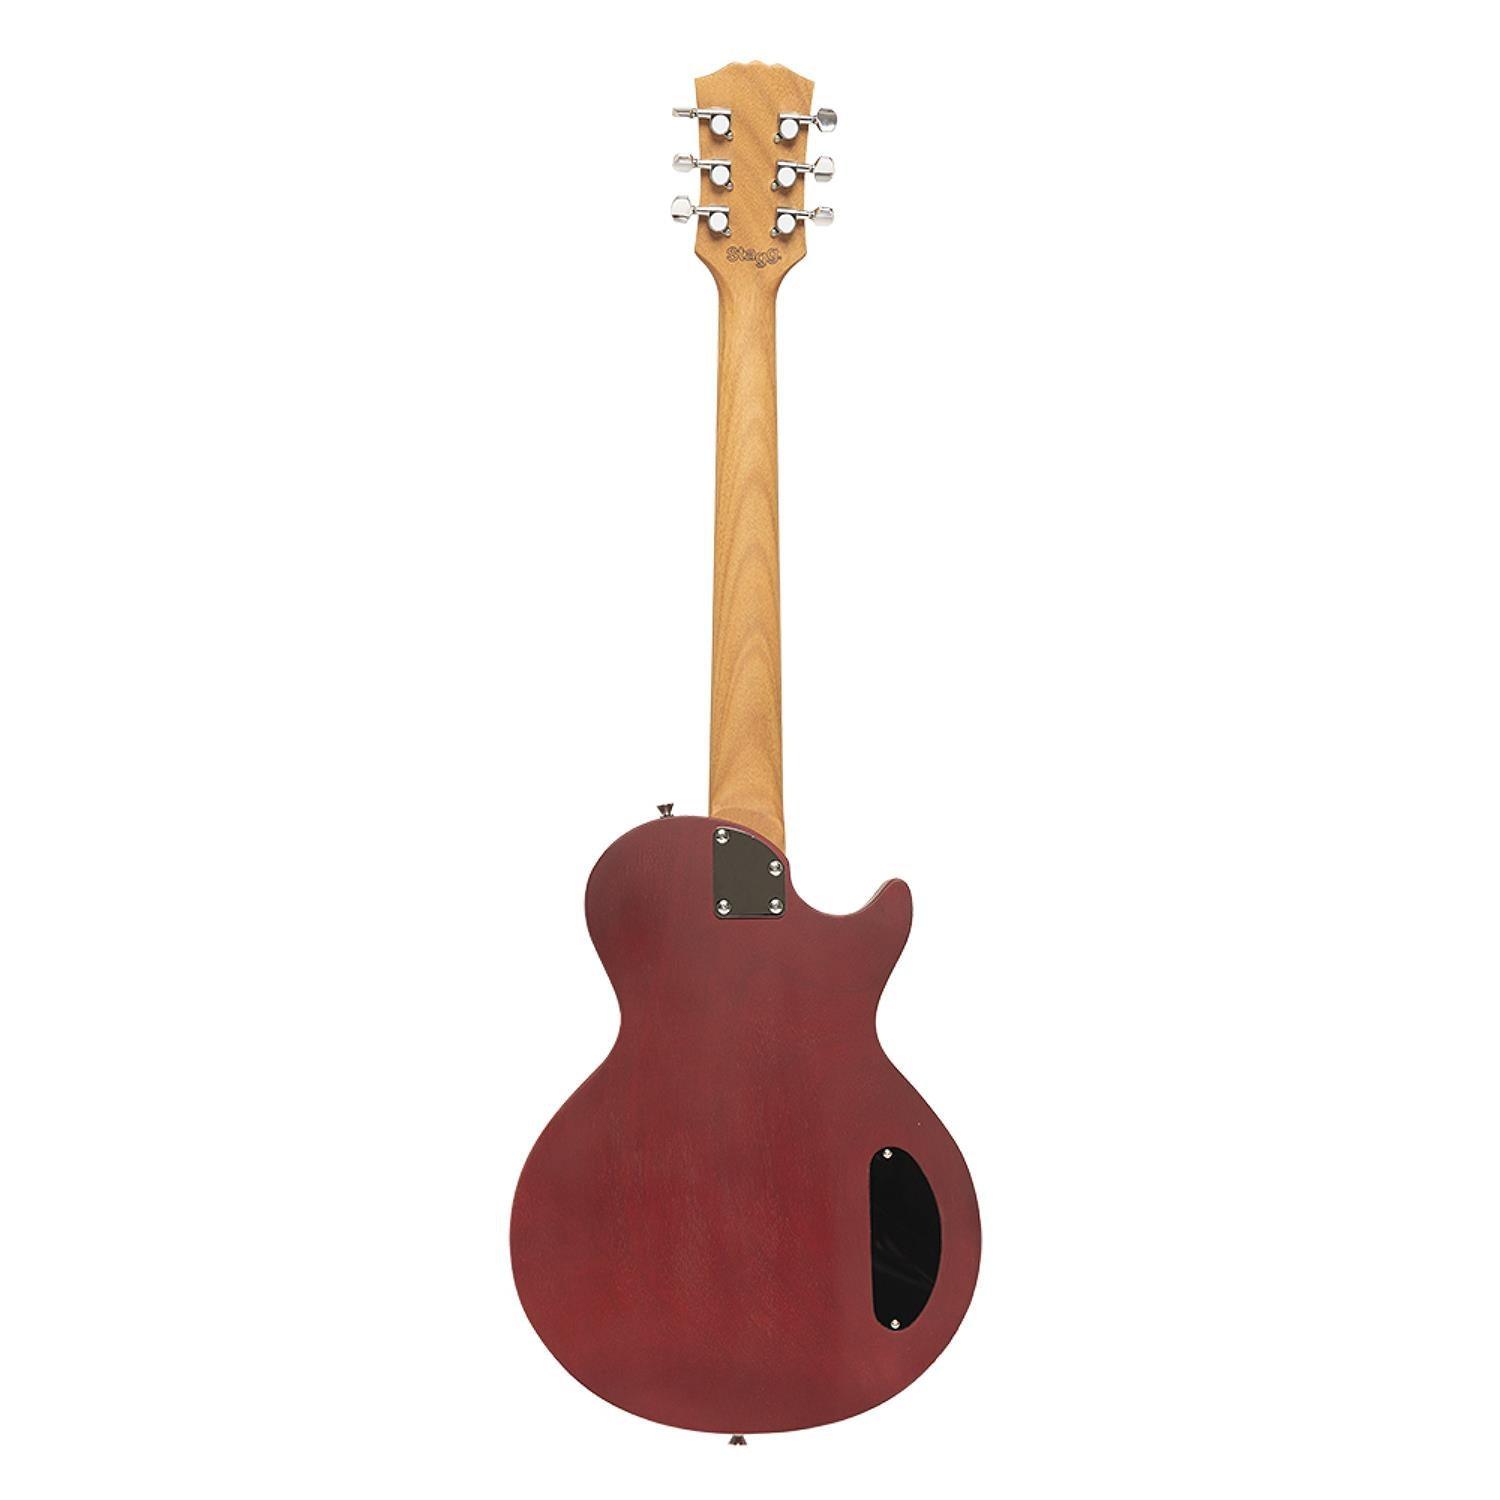 Stagg SEL-HB90 CHRRYL LH CHERRY Standard Mahogany Electric Guitar - DY Pro Audio